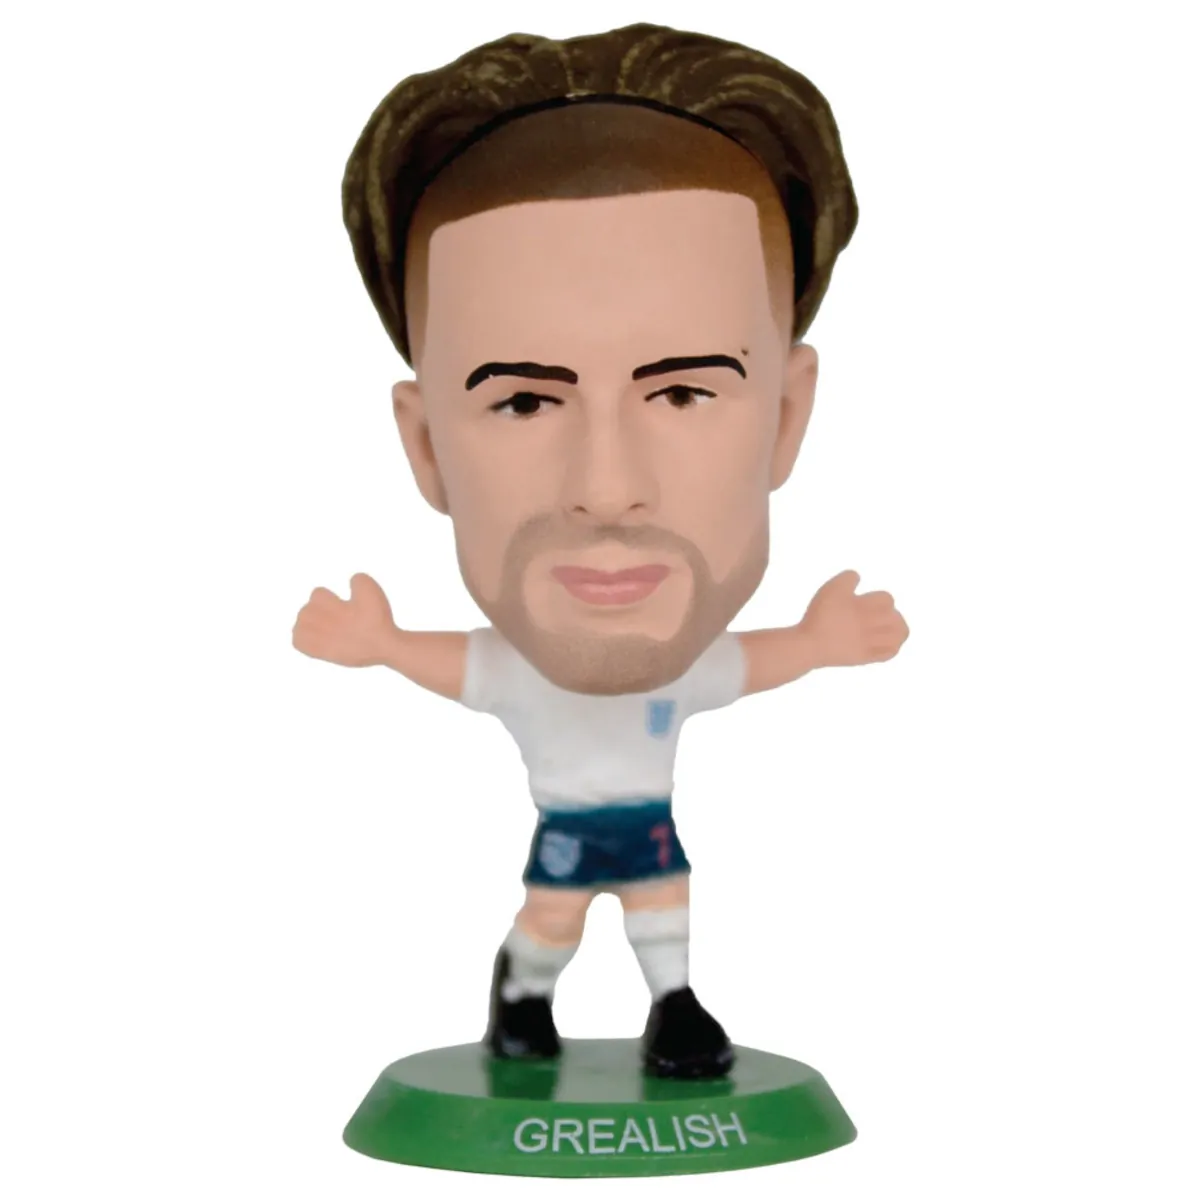 TM-05224 England F.A. SoccerStarz Collectable Figure - Jack Grealish